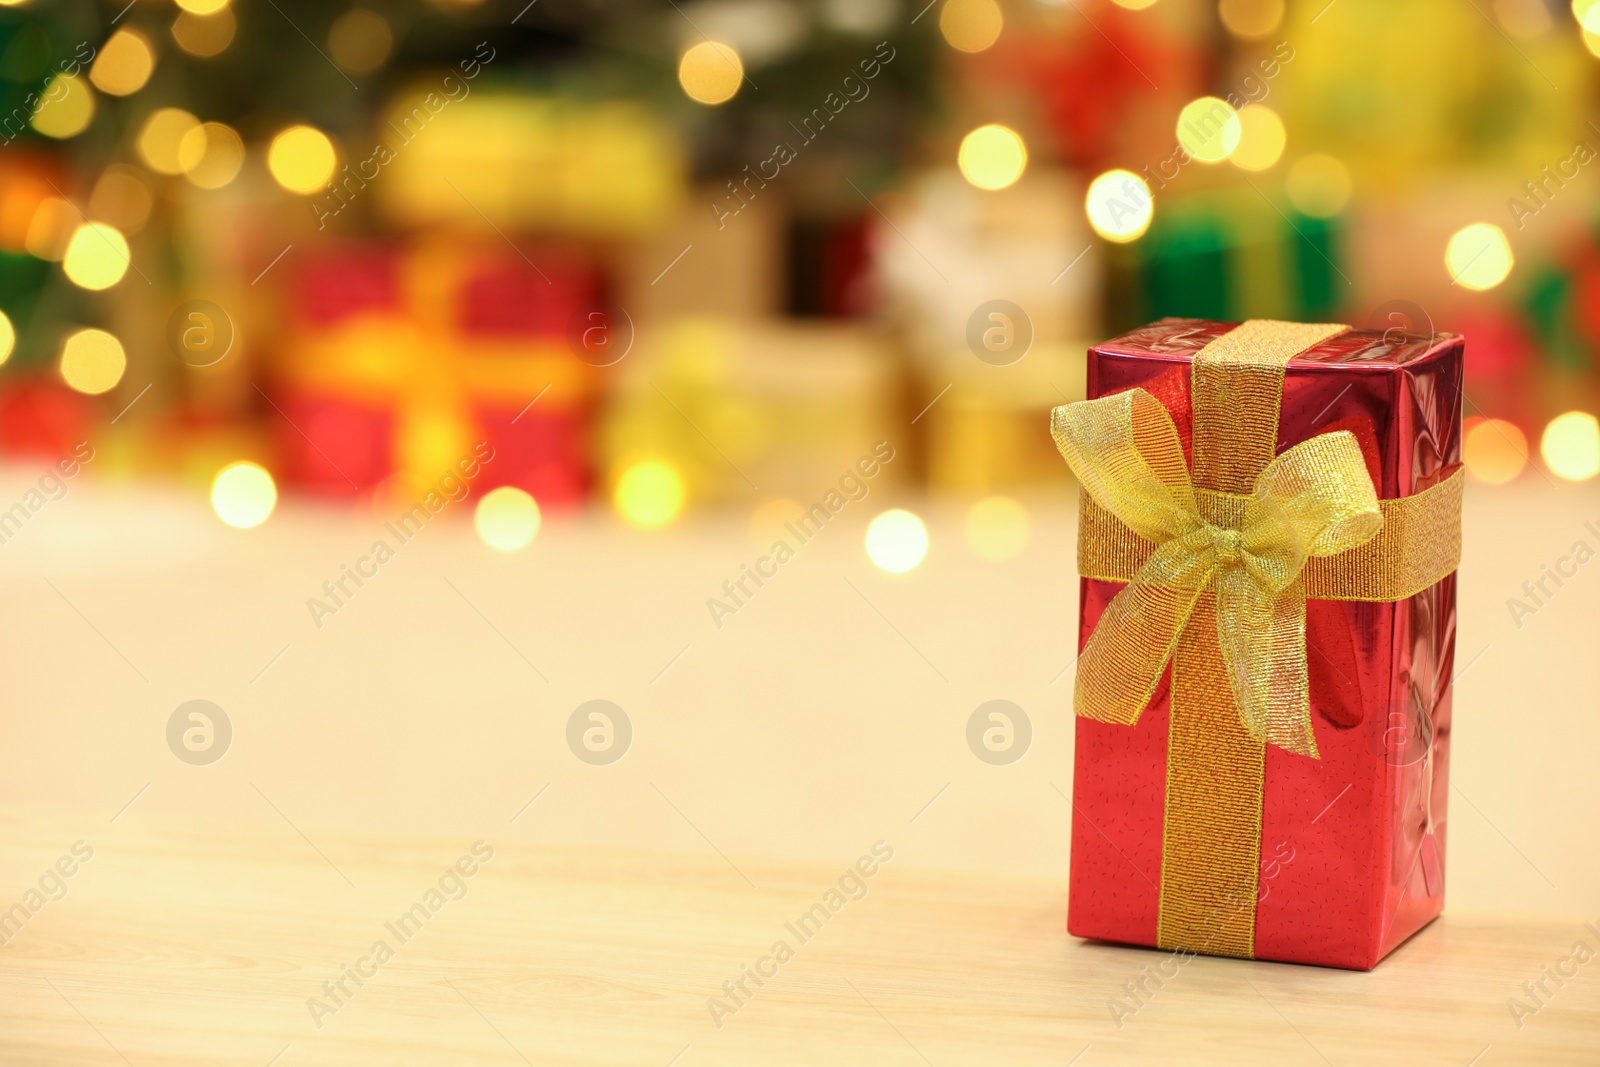 Photo of Beautifully wrapped gift box on wooden table against blurred festive lights, space for text. Christmas celebration